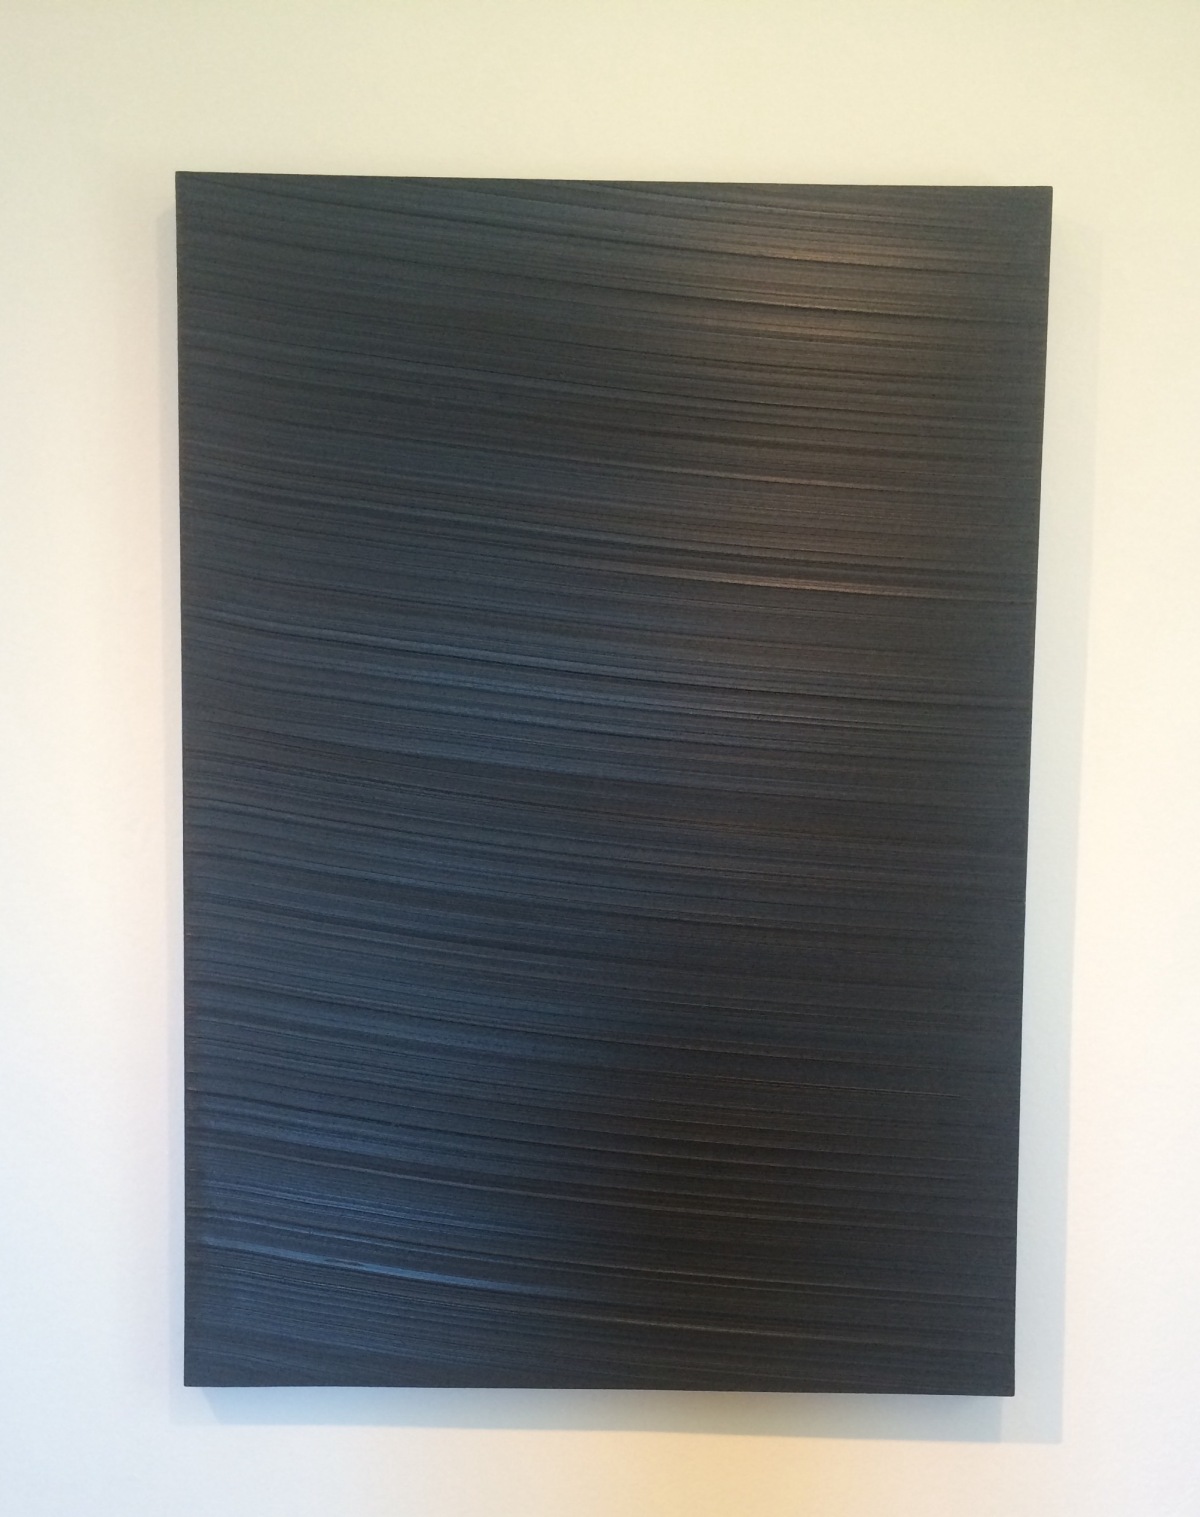 Soulages Hermitage Lausanne